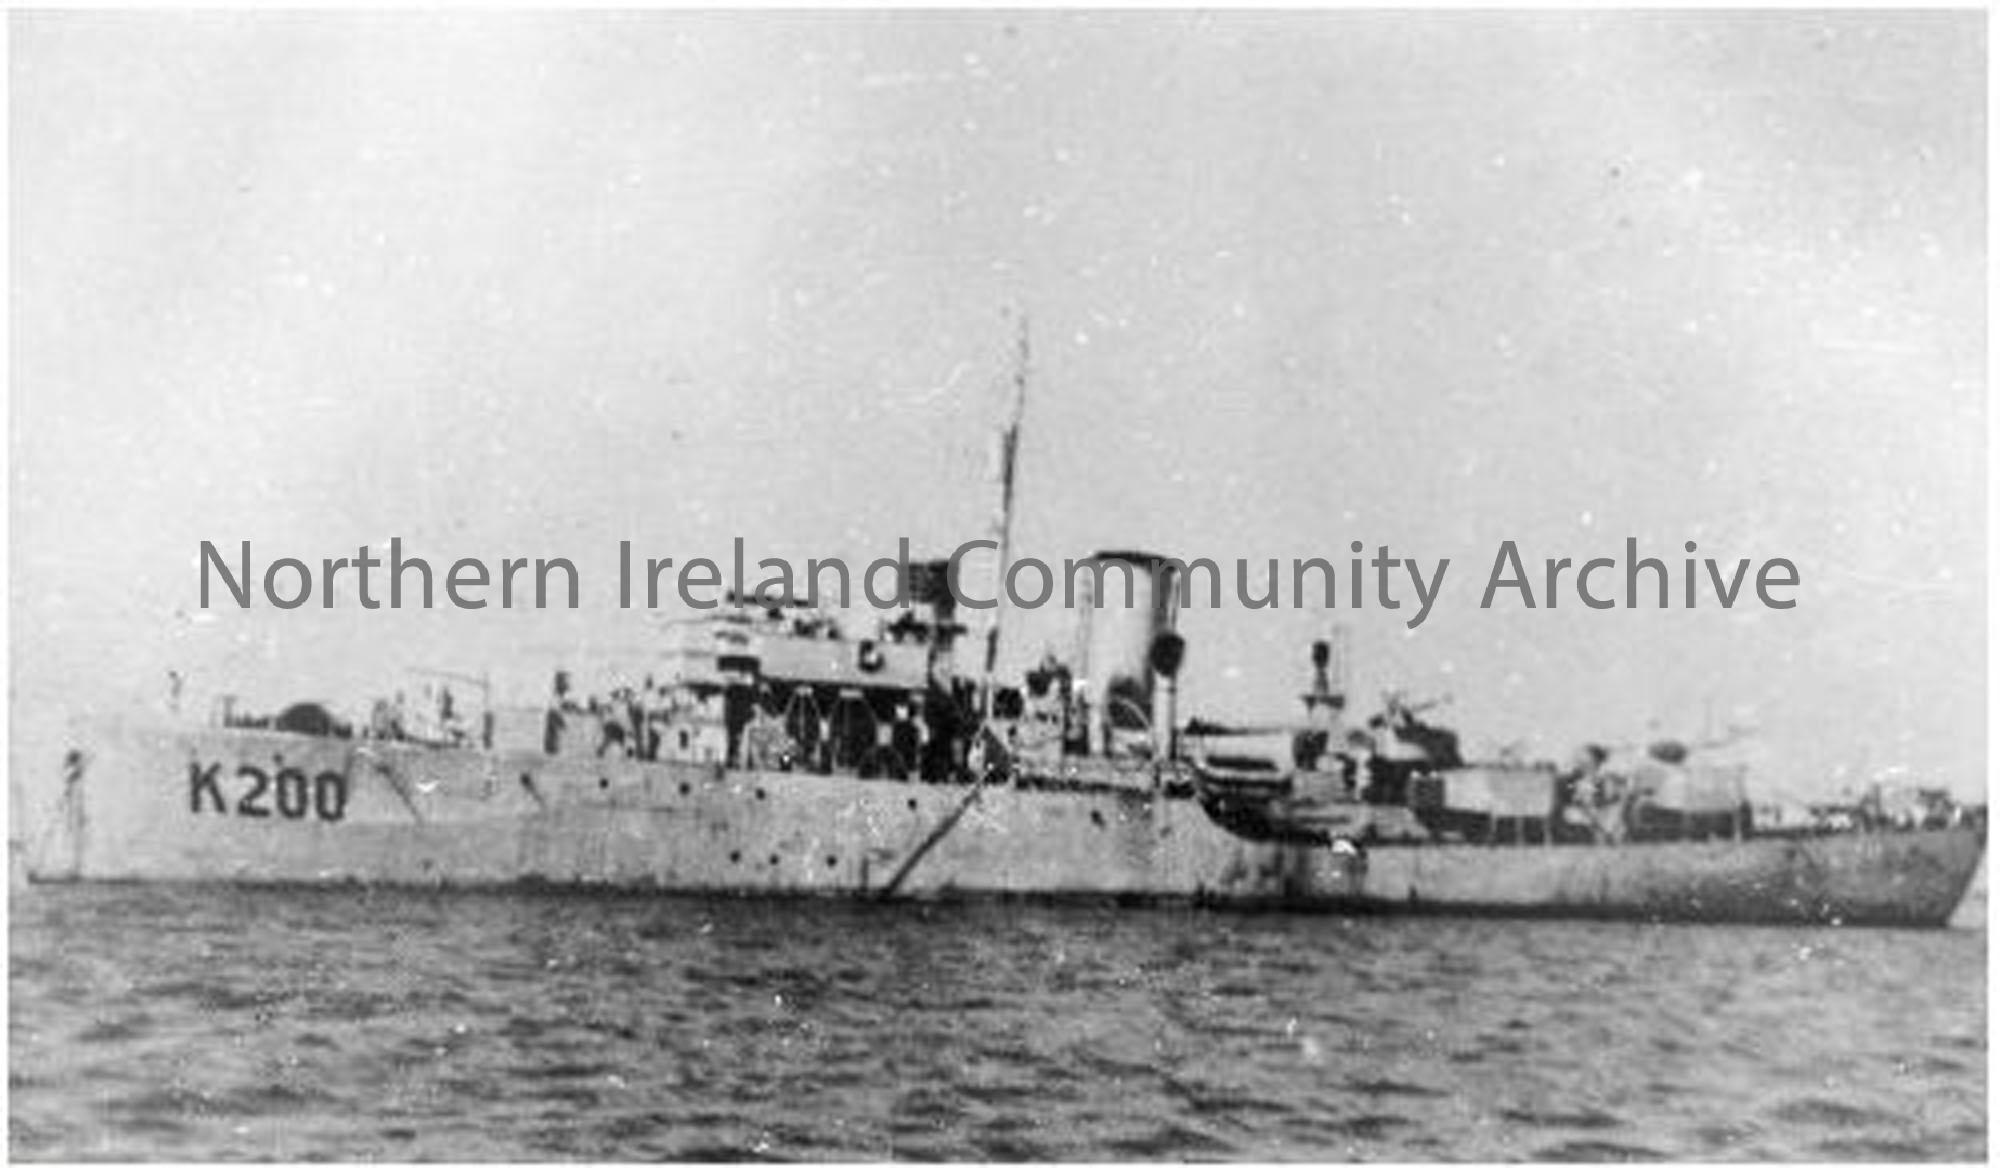 HMS Genista
K200
Ship Number 1108
Launched 24th July 1941
Commissioned 18th December 1941
 (4380)